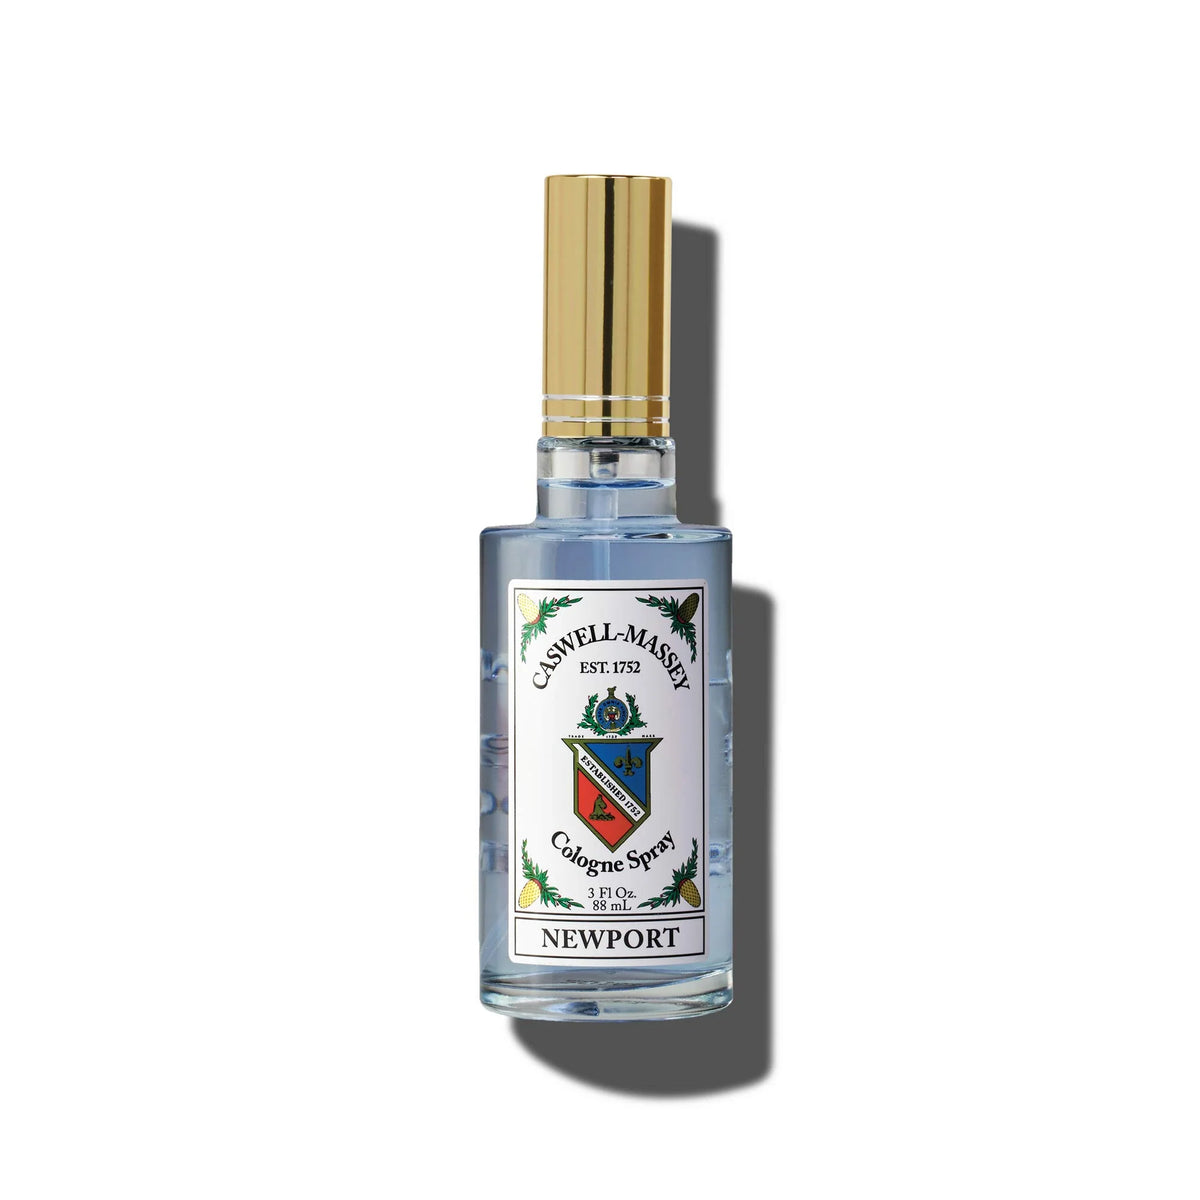 A picture of a Caswell Massey Newport Cologne spray bottle labeled "Newport Cologne" with a sophisticated nautical crest design on a white background.